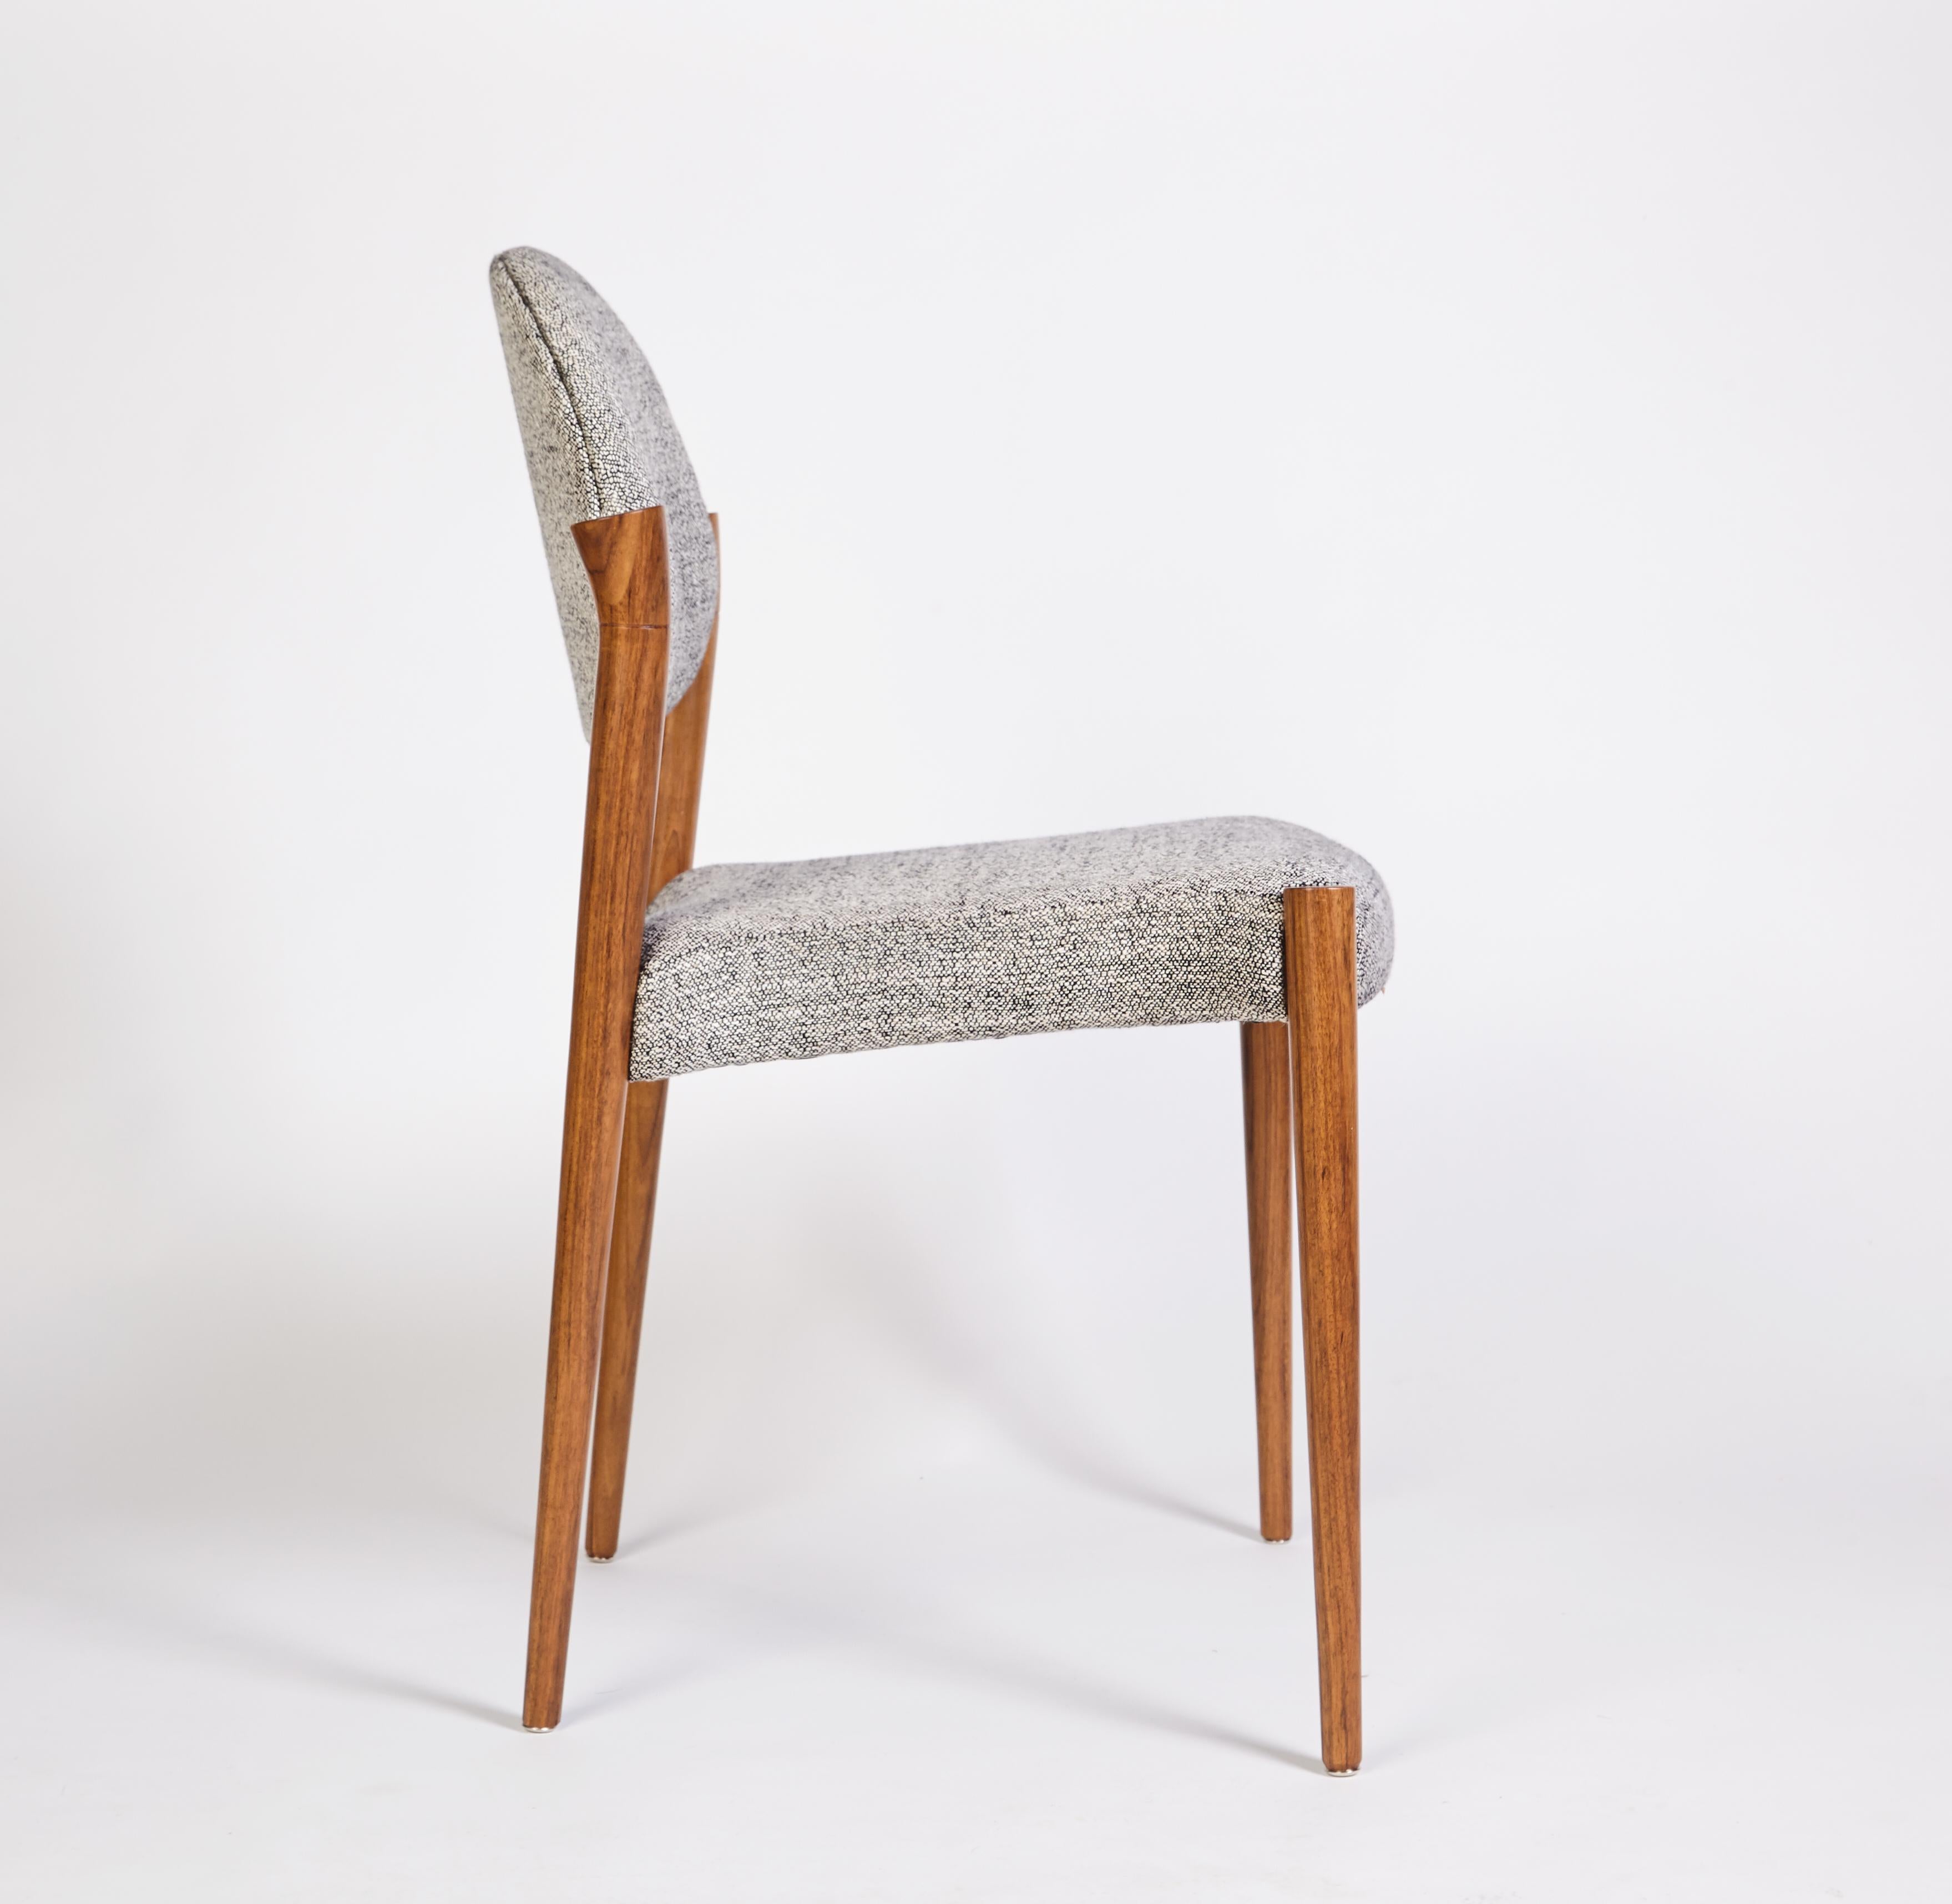 Tanoco Small Chair, in Satin Mutenye Wood, Handcrafted in Portugal by Duistt

Tanoco chairs are inspired by the midcentury architecture and interior design. With its long arches creating simultaniously a sensation of stability and movement. The name